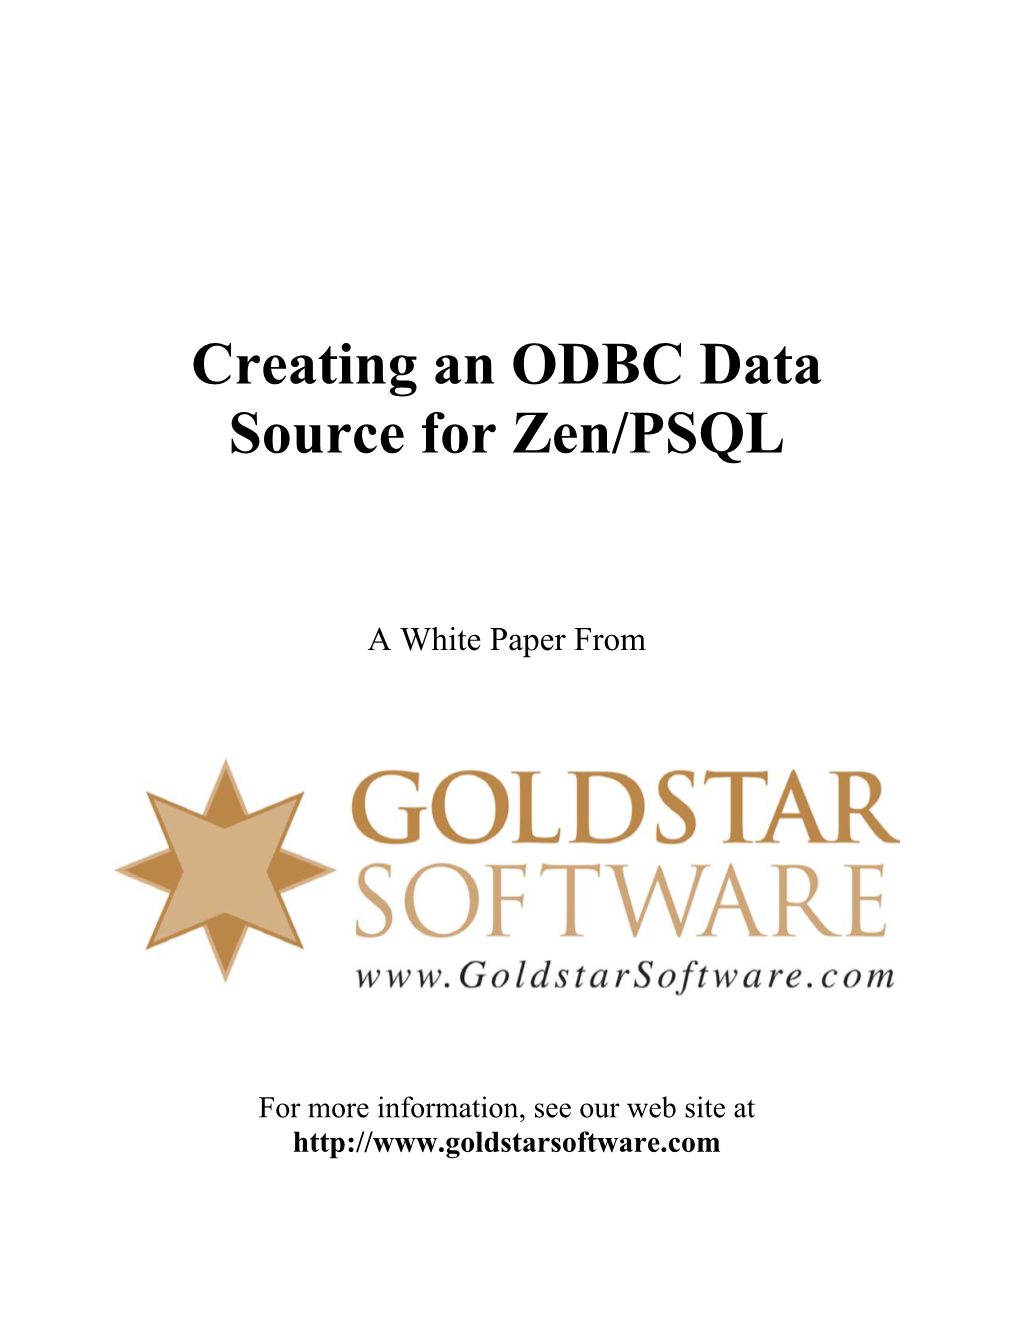 Creating an ODBC Data Source for Zen/PSQL